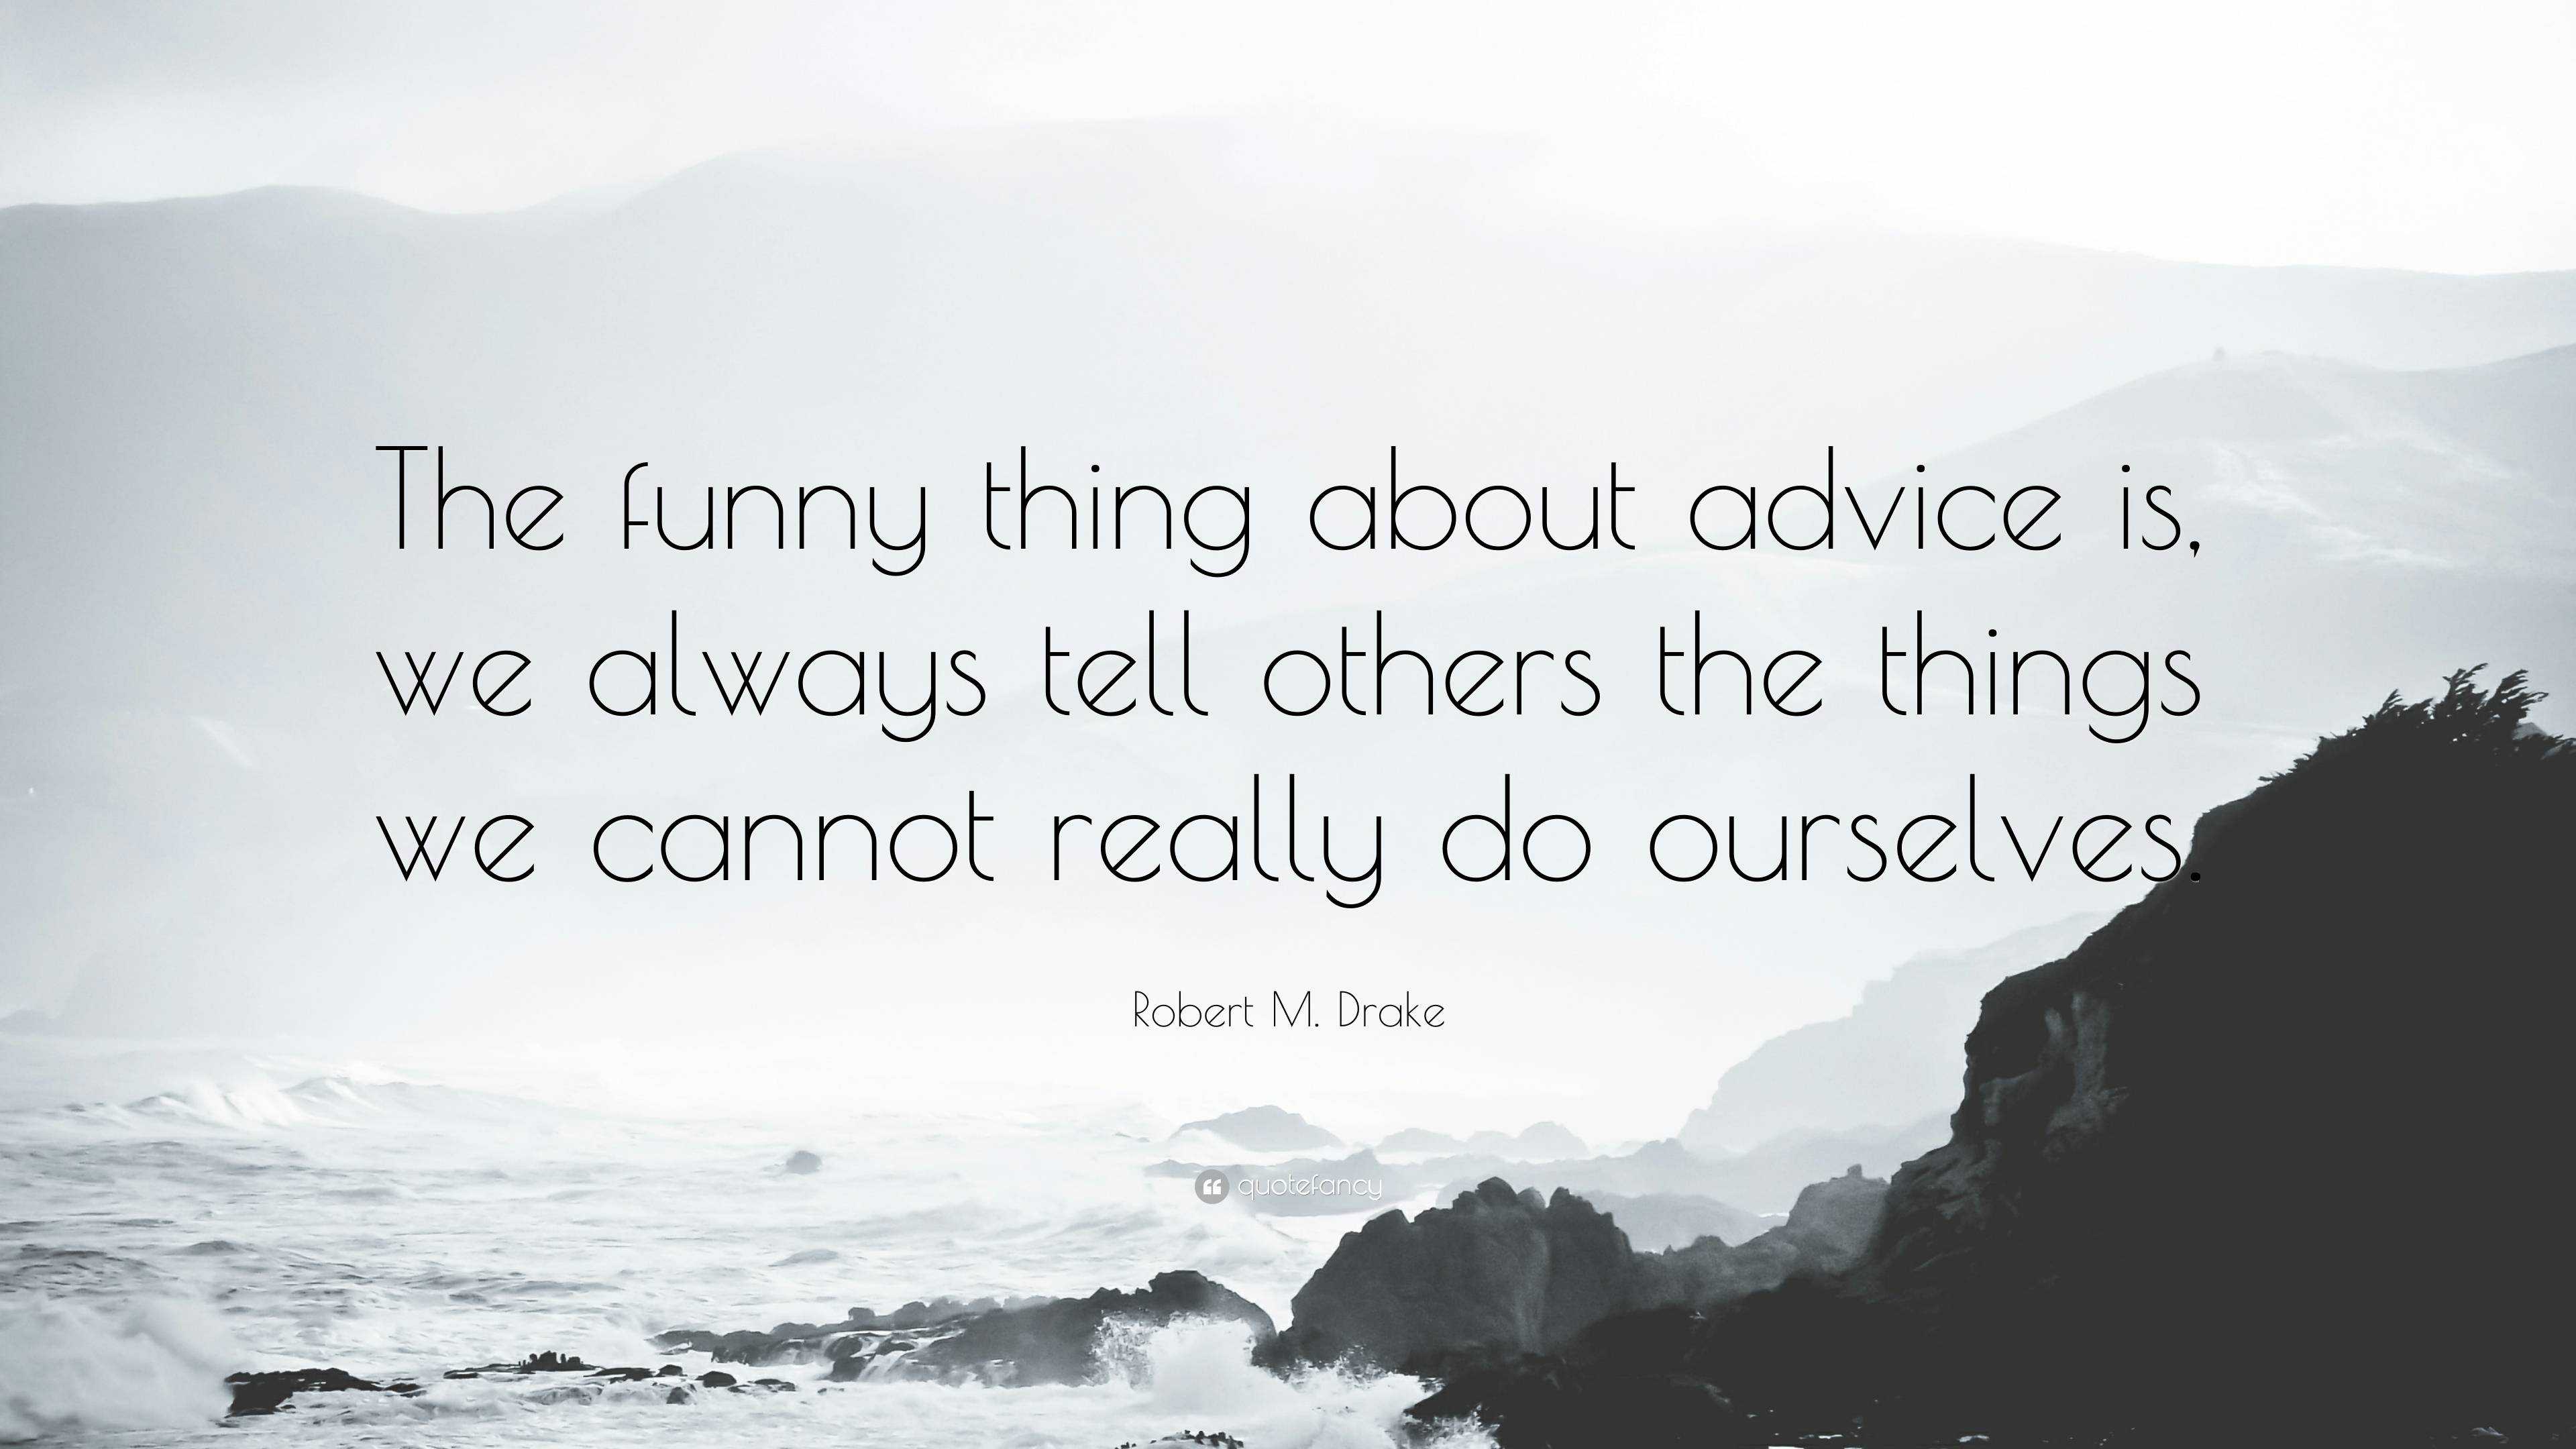 Robert M. Drake Quote: “The funny thing about advice is, we always tell  others the things